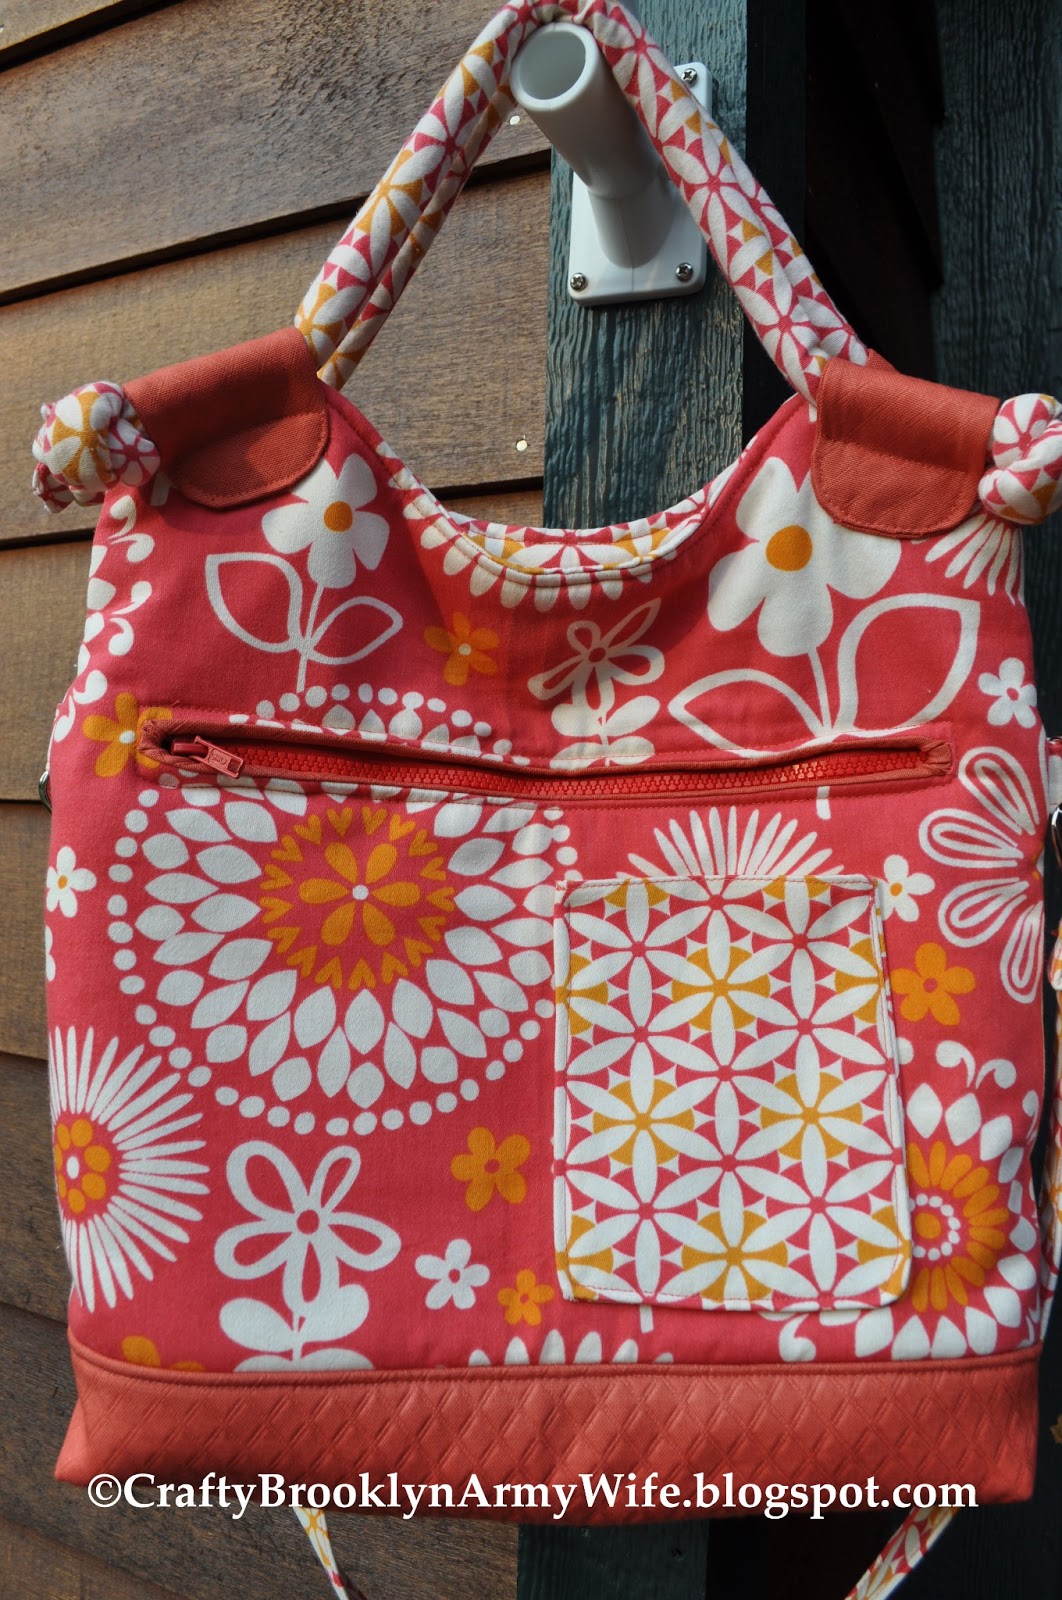 Crafty Brooklyn Army Wife: Test Pattern for Sew Sweetness' Lapin Noir Bag